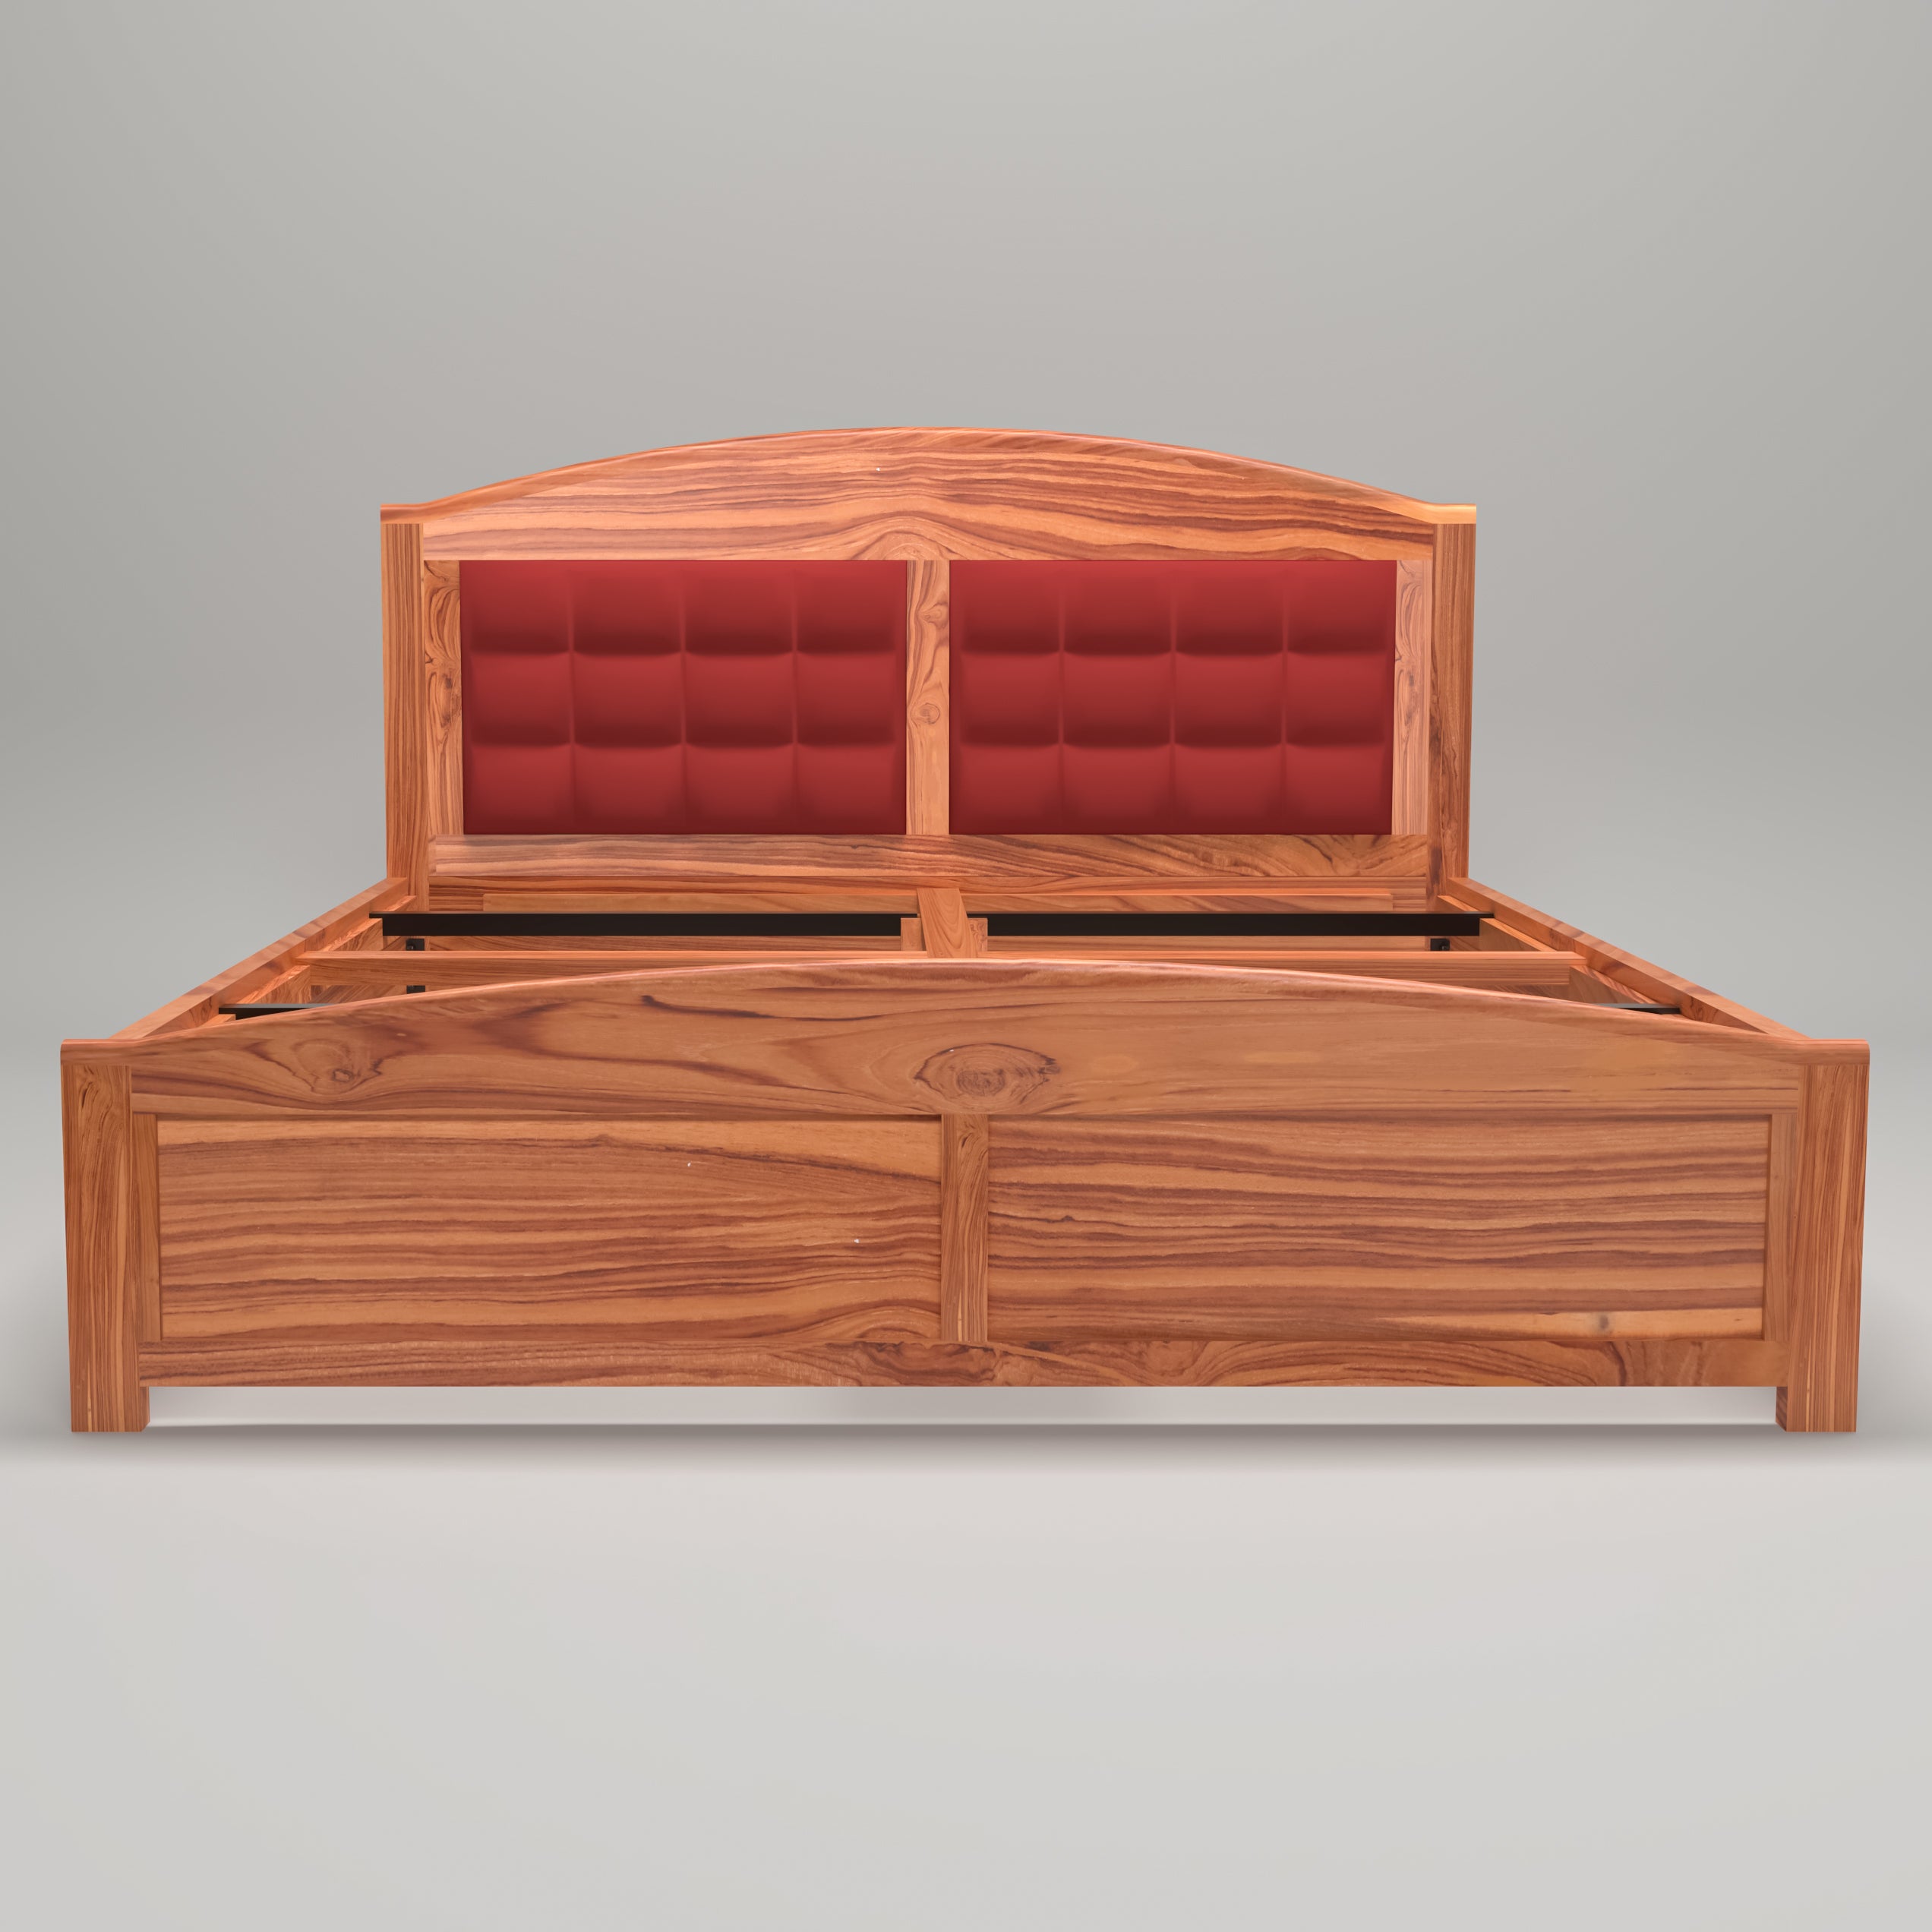 Wooden Classical Upholstered Bed Bed